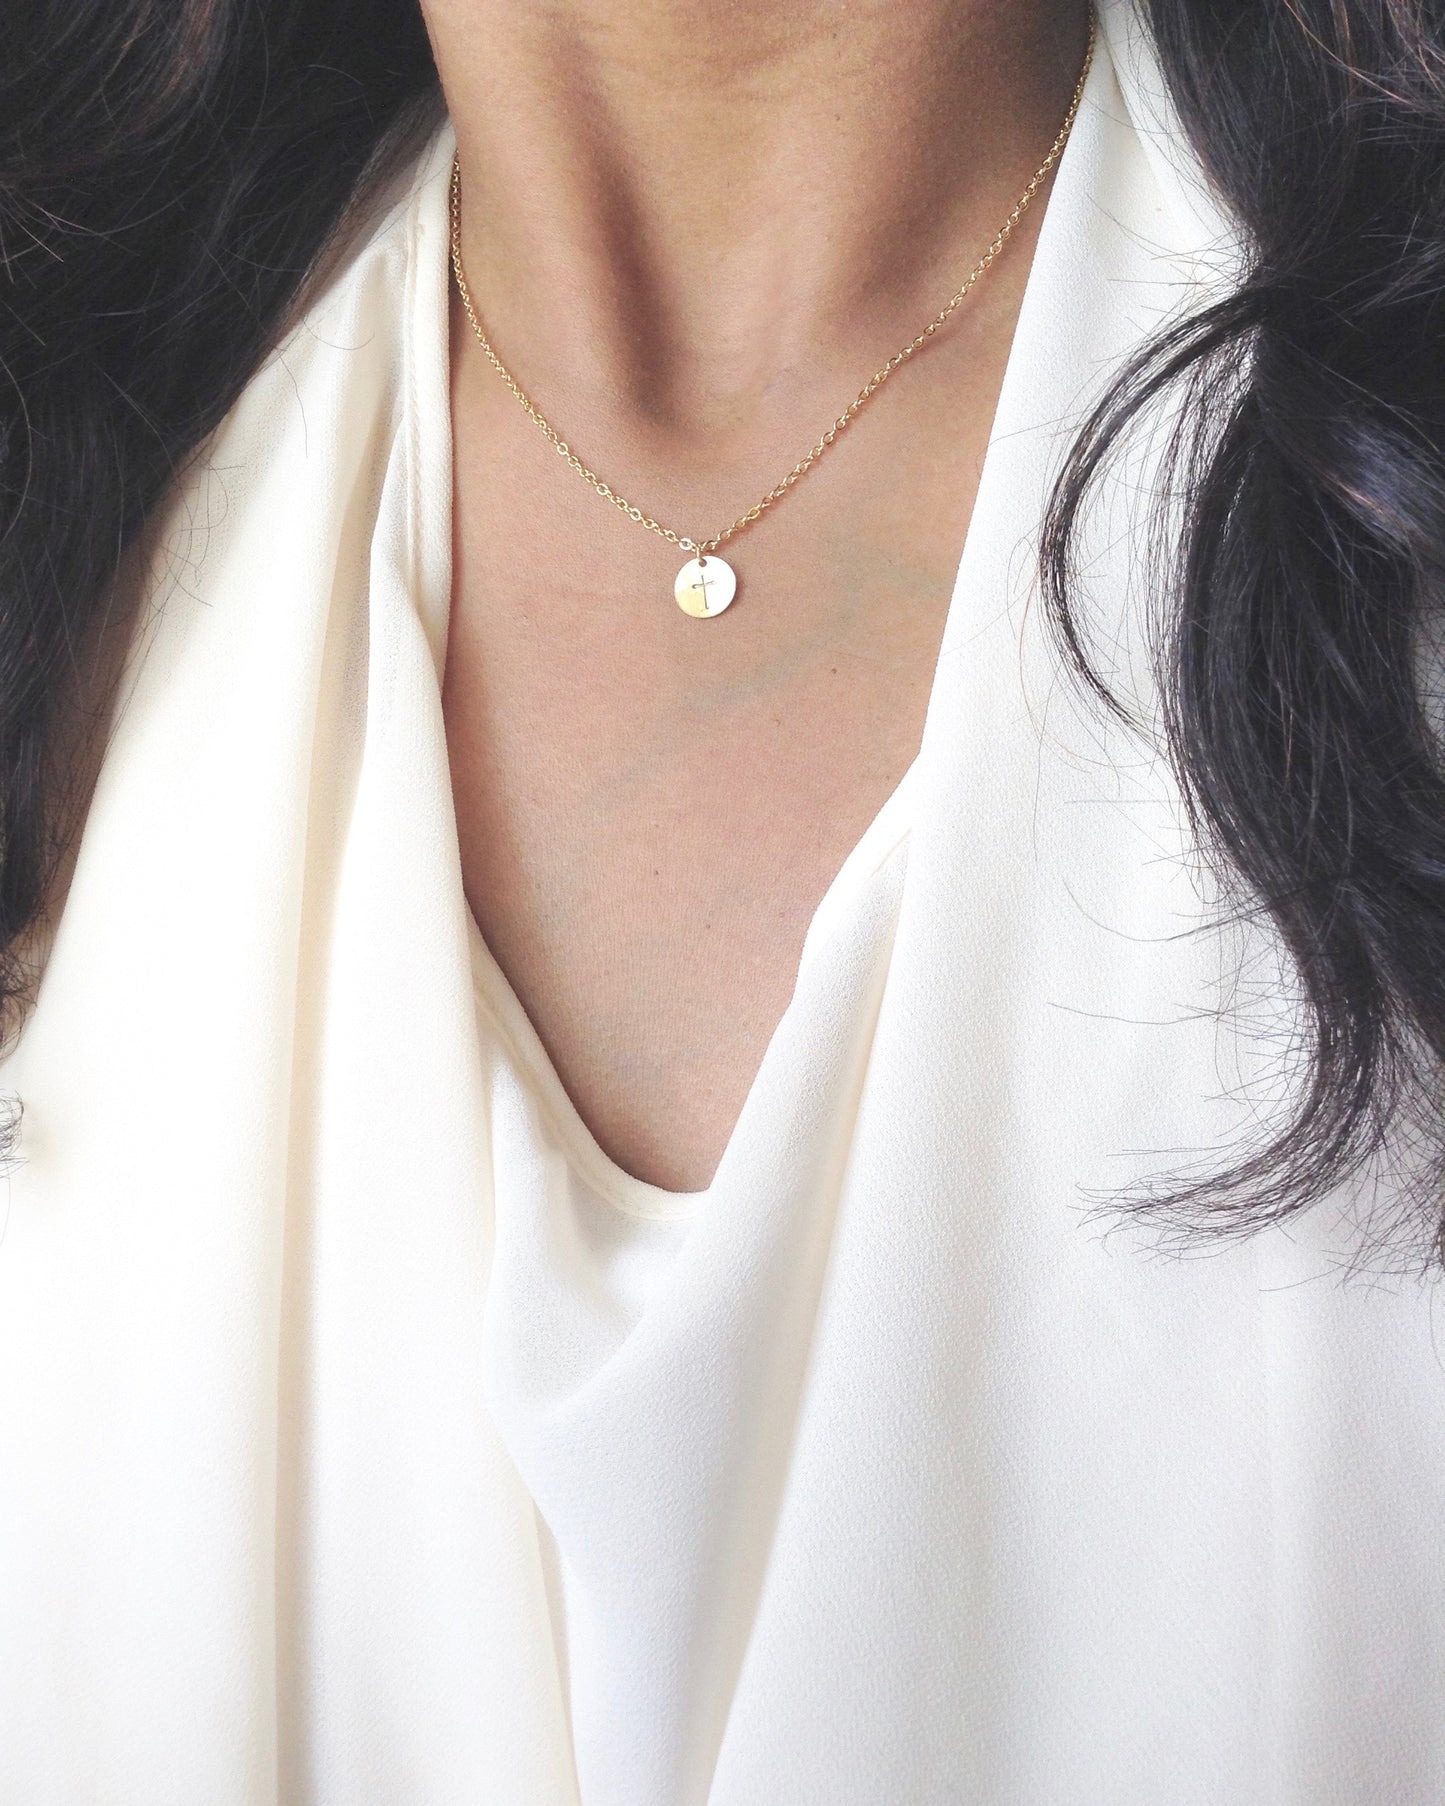 Tiny Minimalist Cross Necklace in Gold or Silver | IB Jewelry 